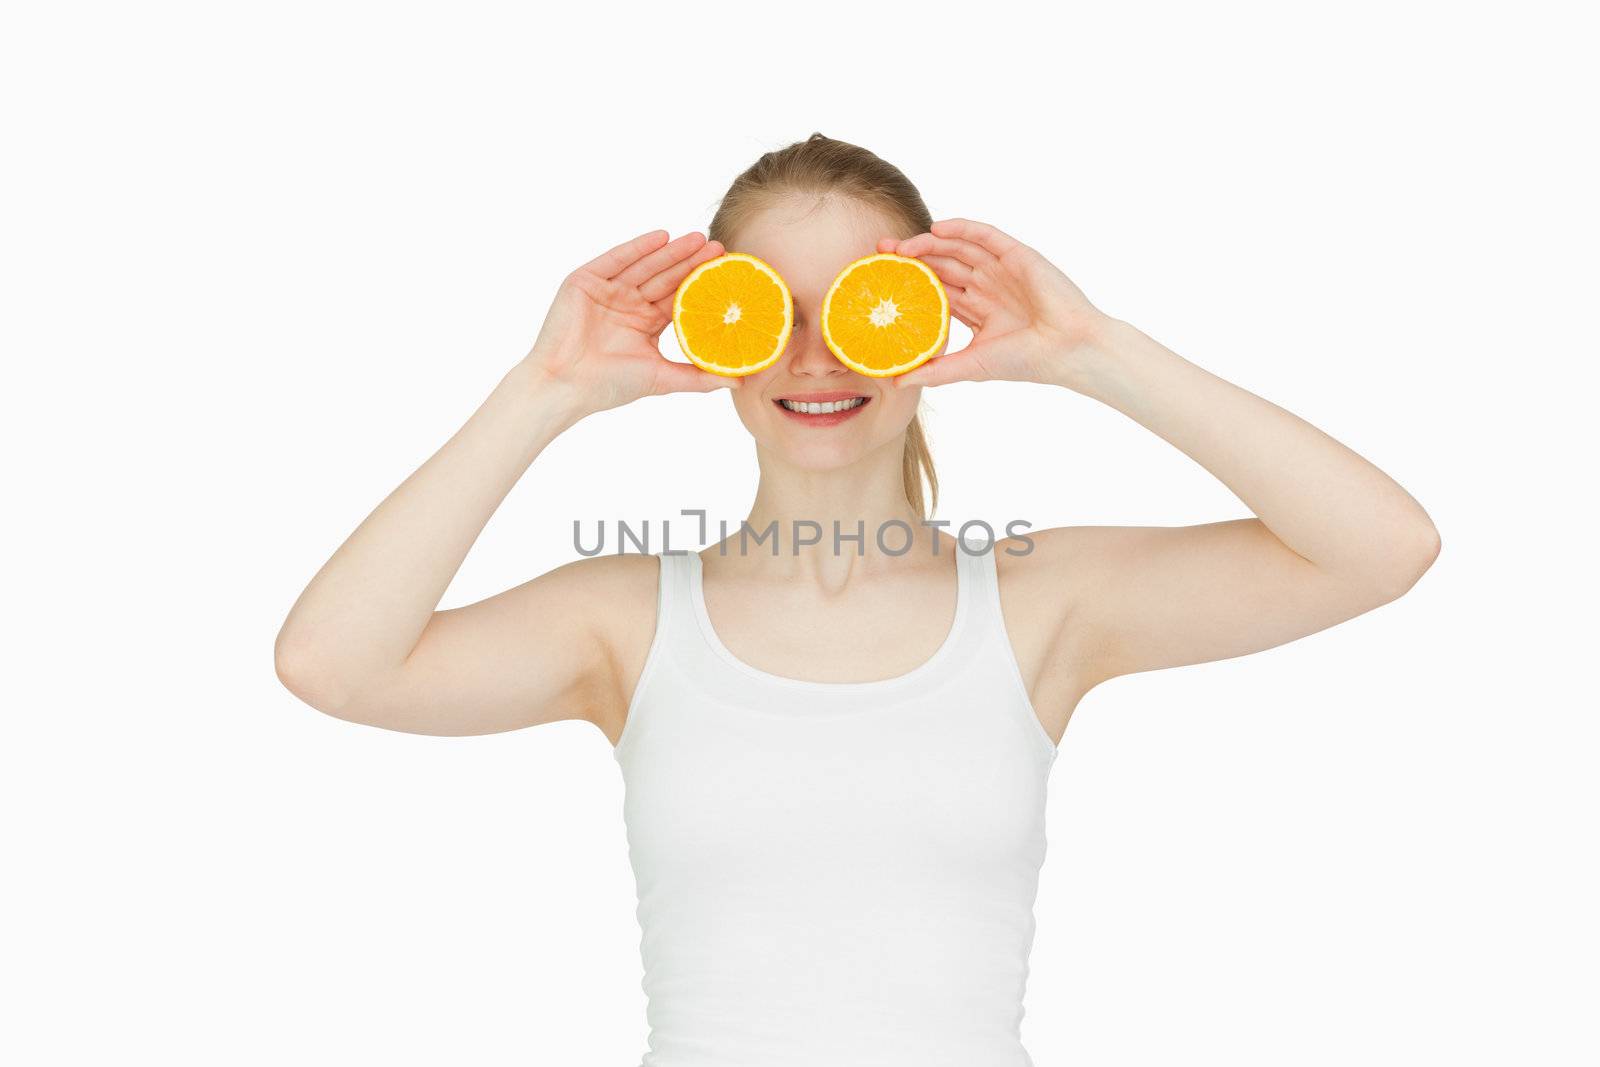 Blond-haired woman placing oranges on her eyes against white background